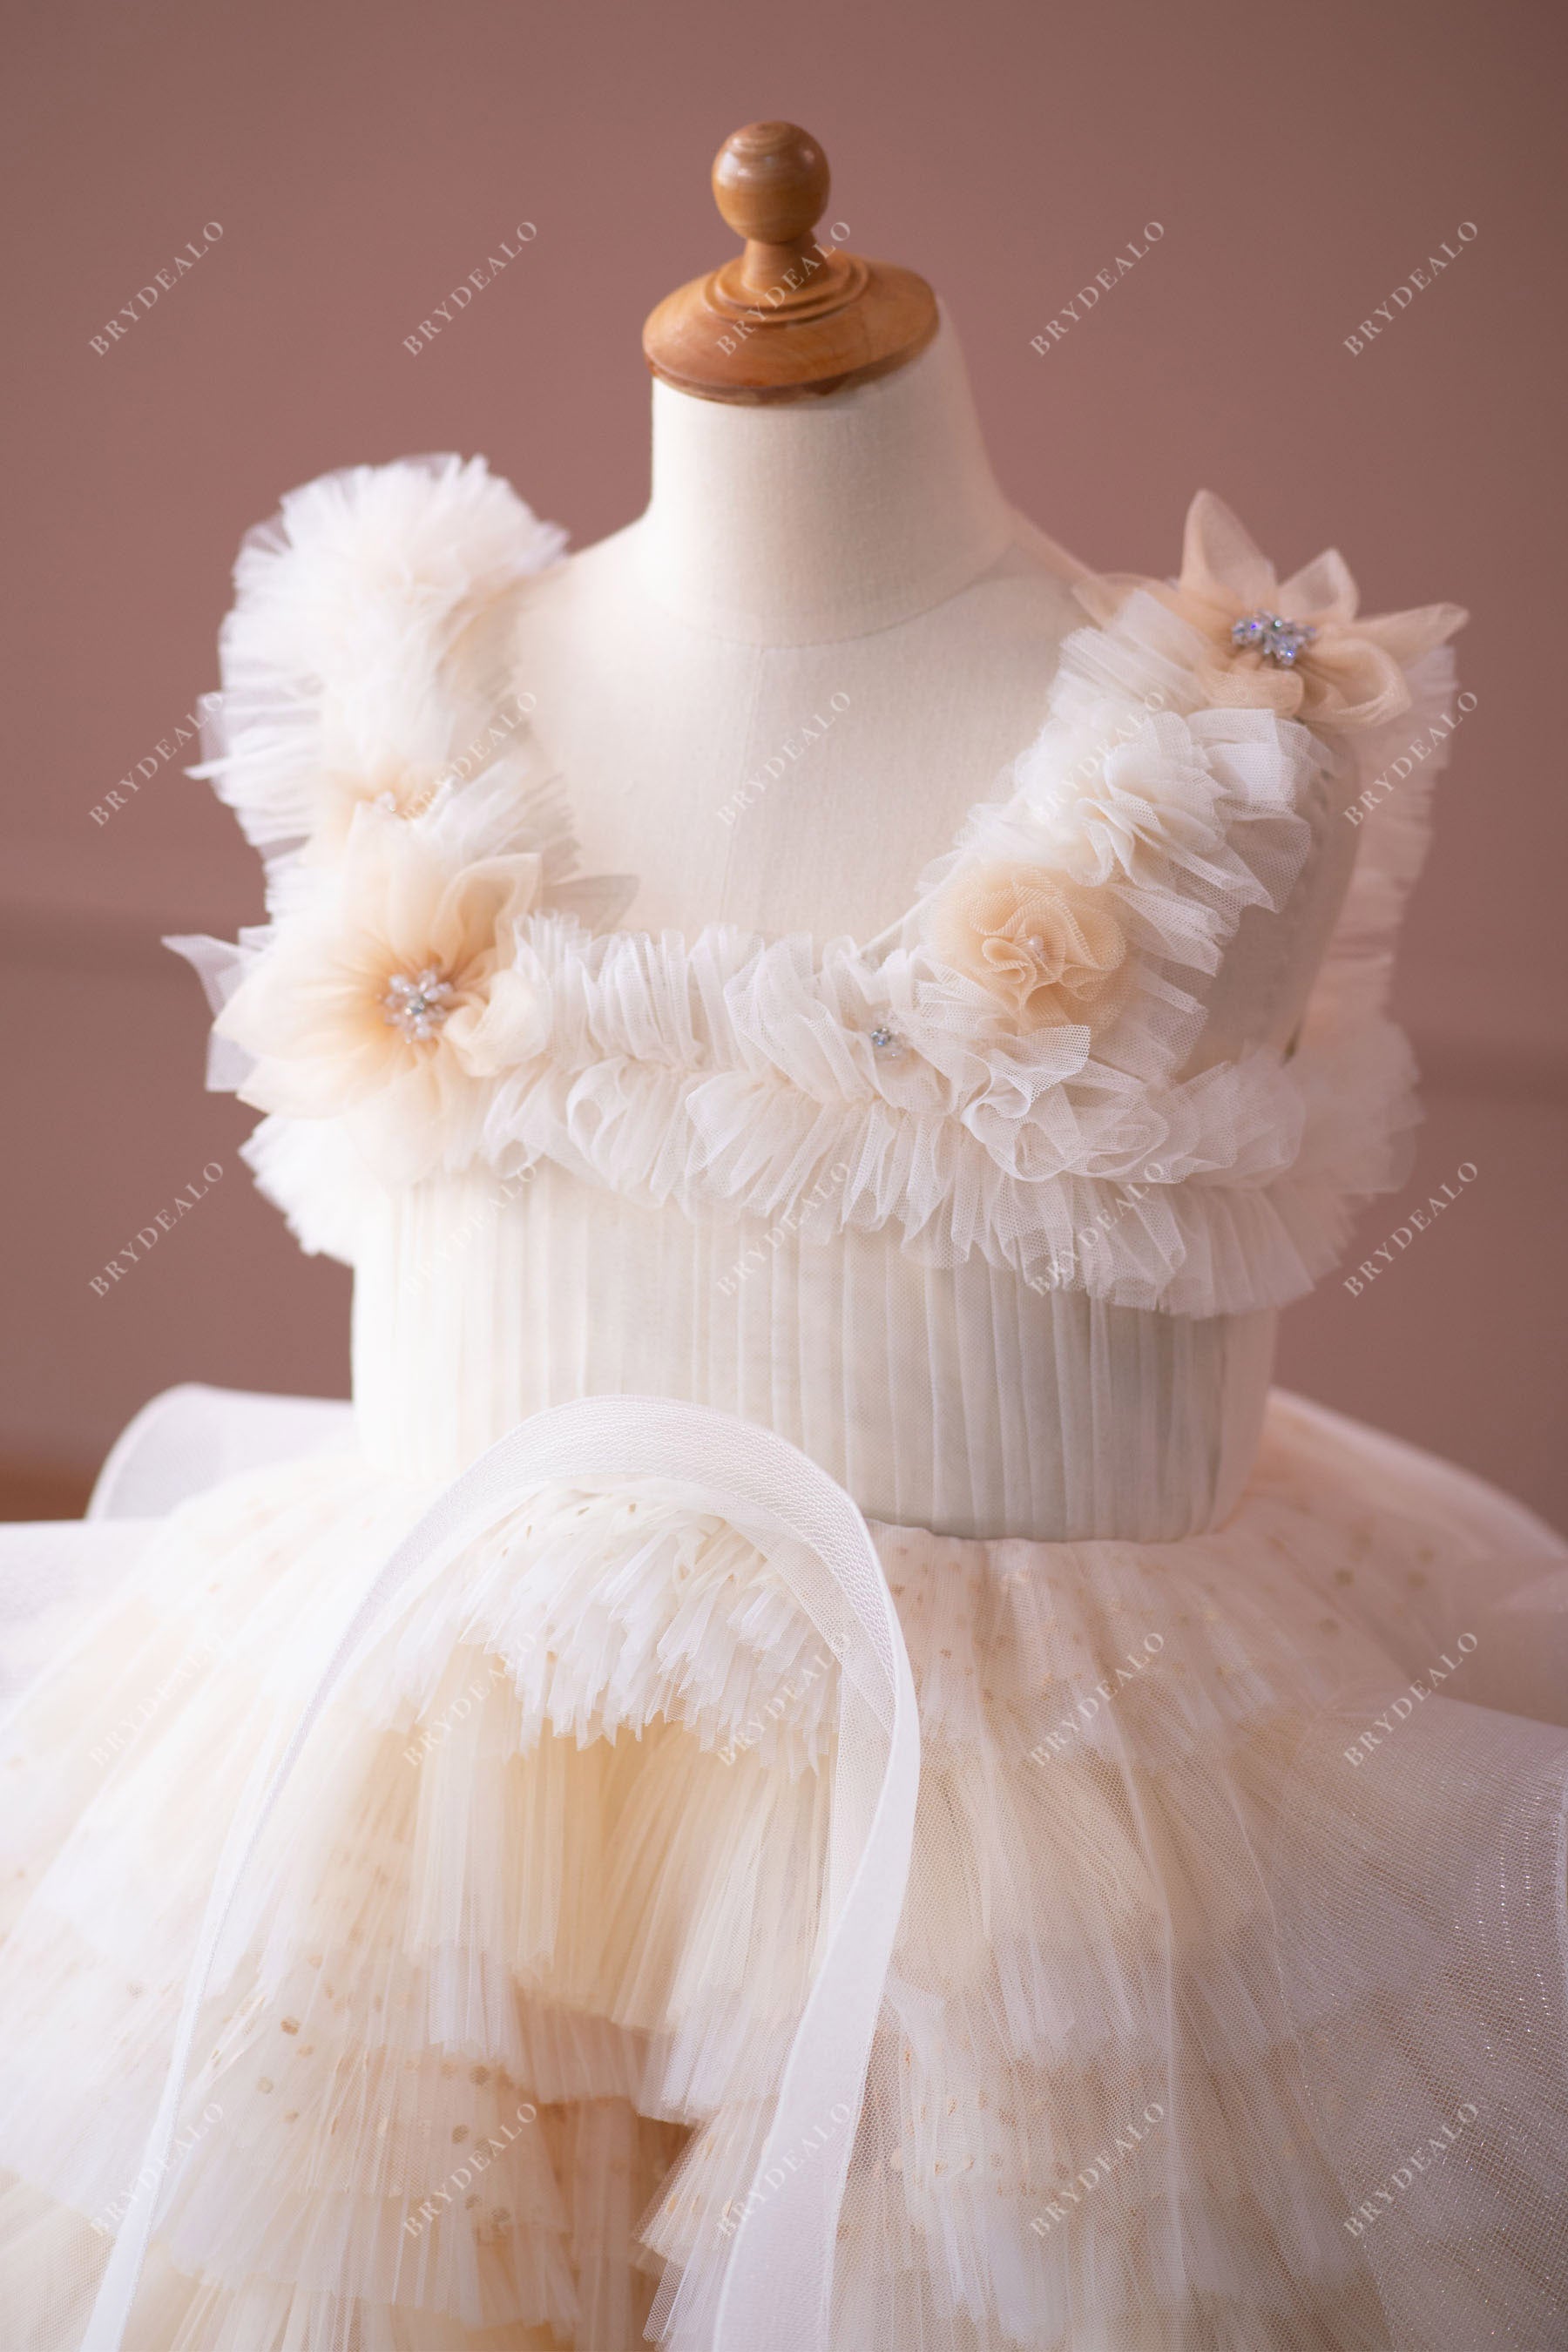 Haute Couture Flower Tiered Tulle Knee Length Kids Birthday Dress Sample